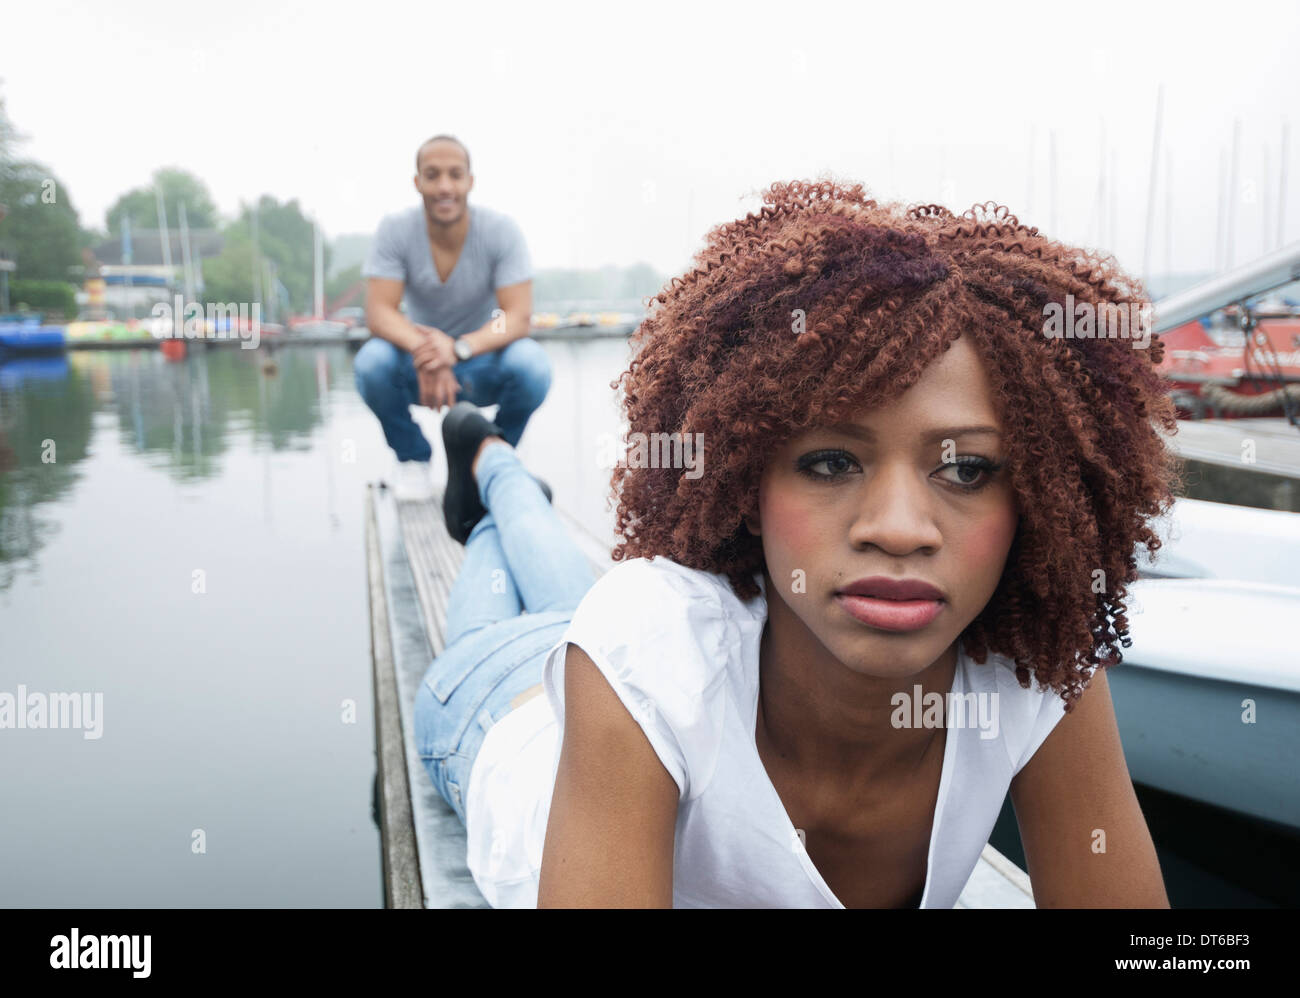 Portrait of sad looking young woman with man in background Stock Photo